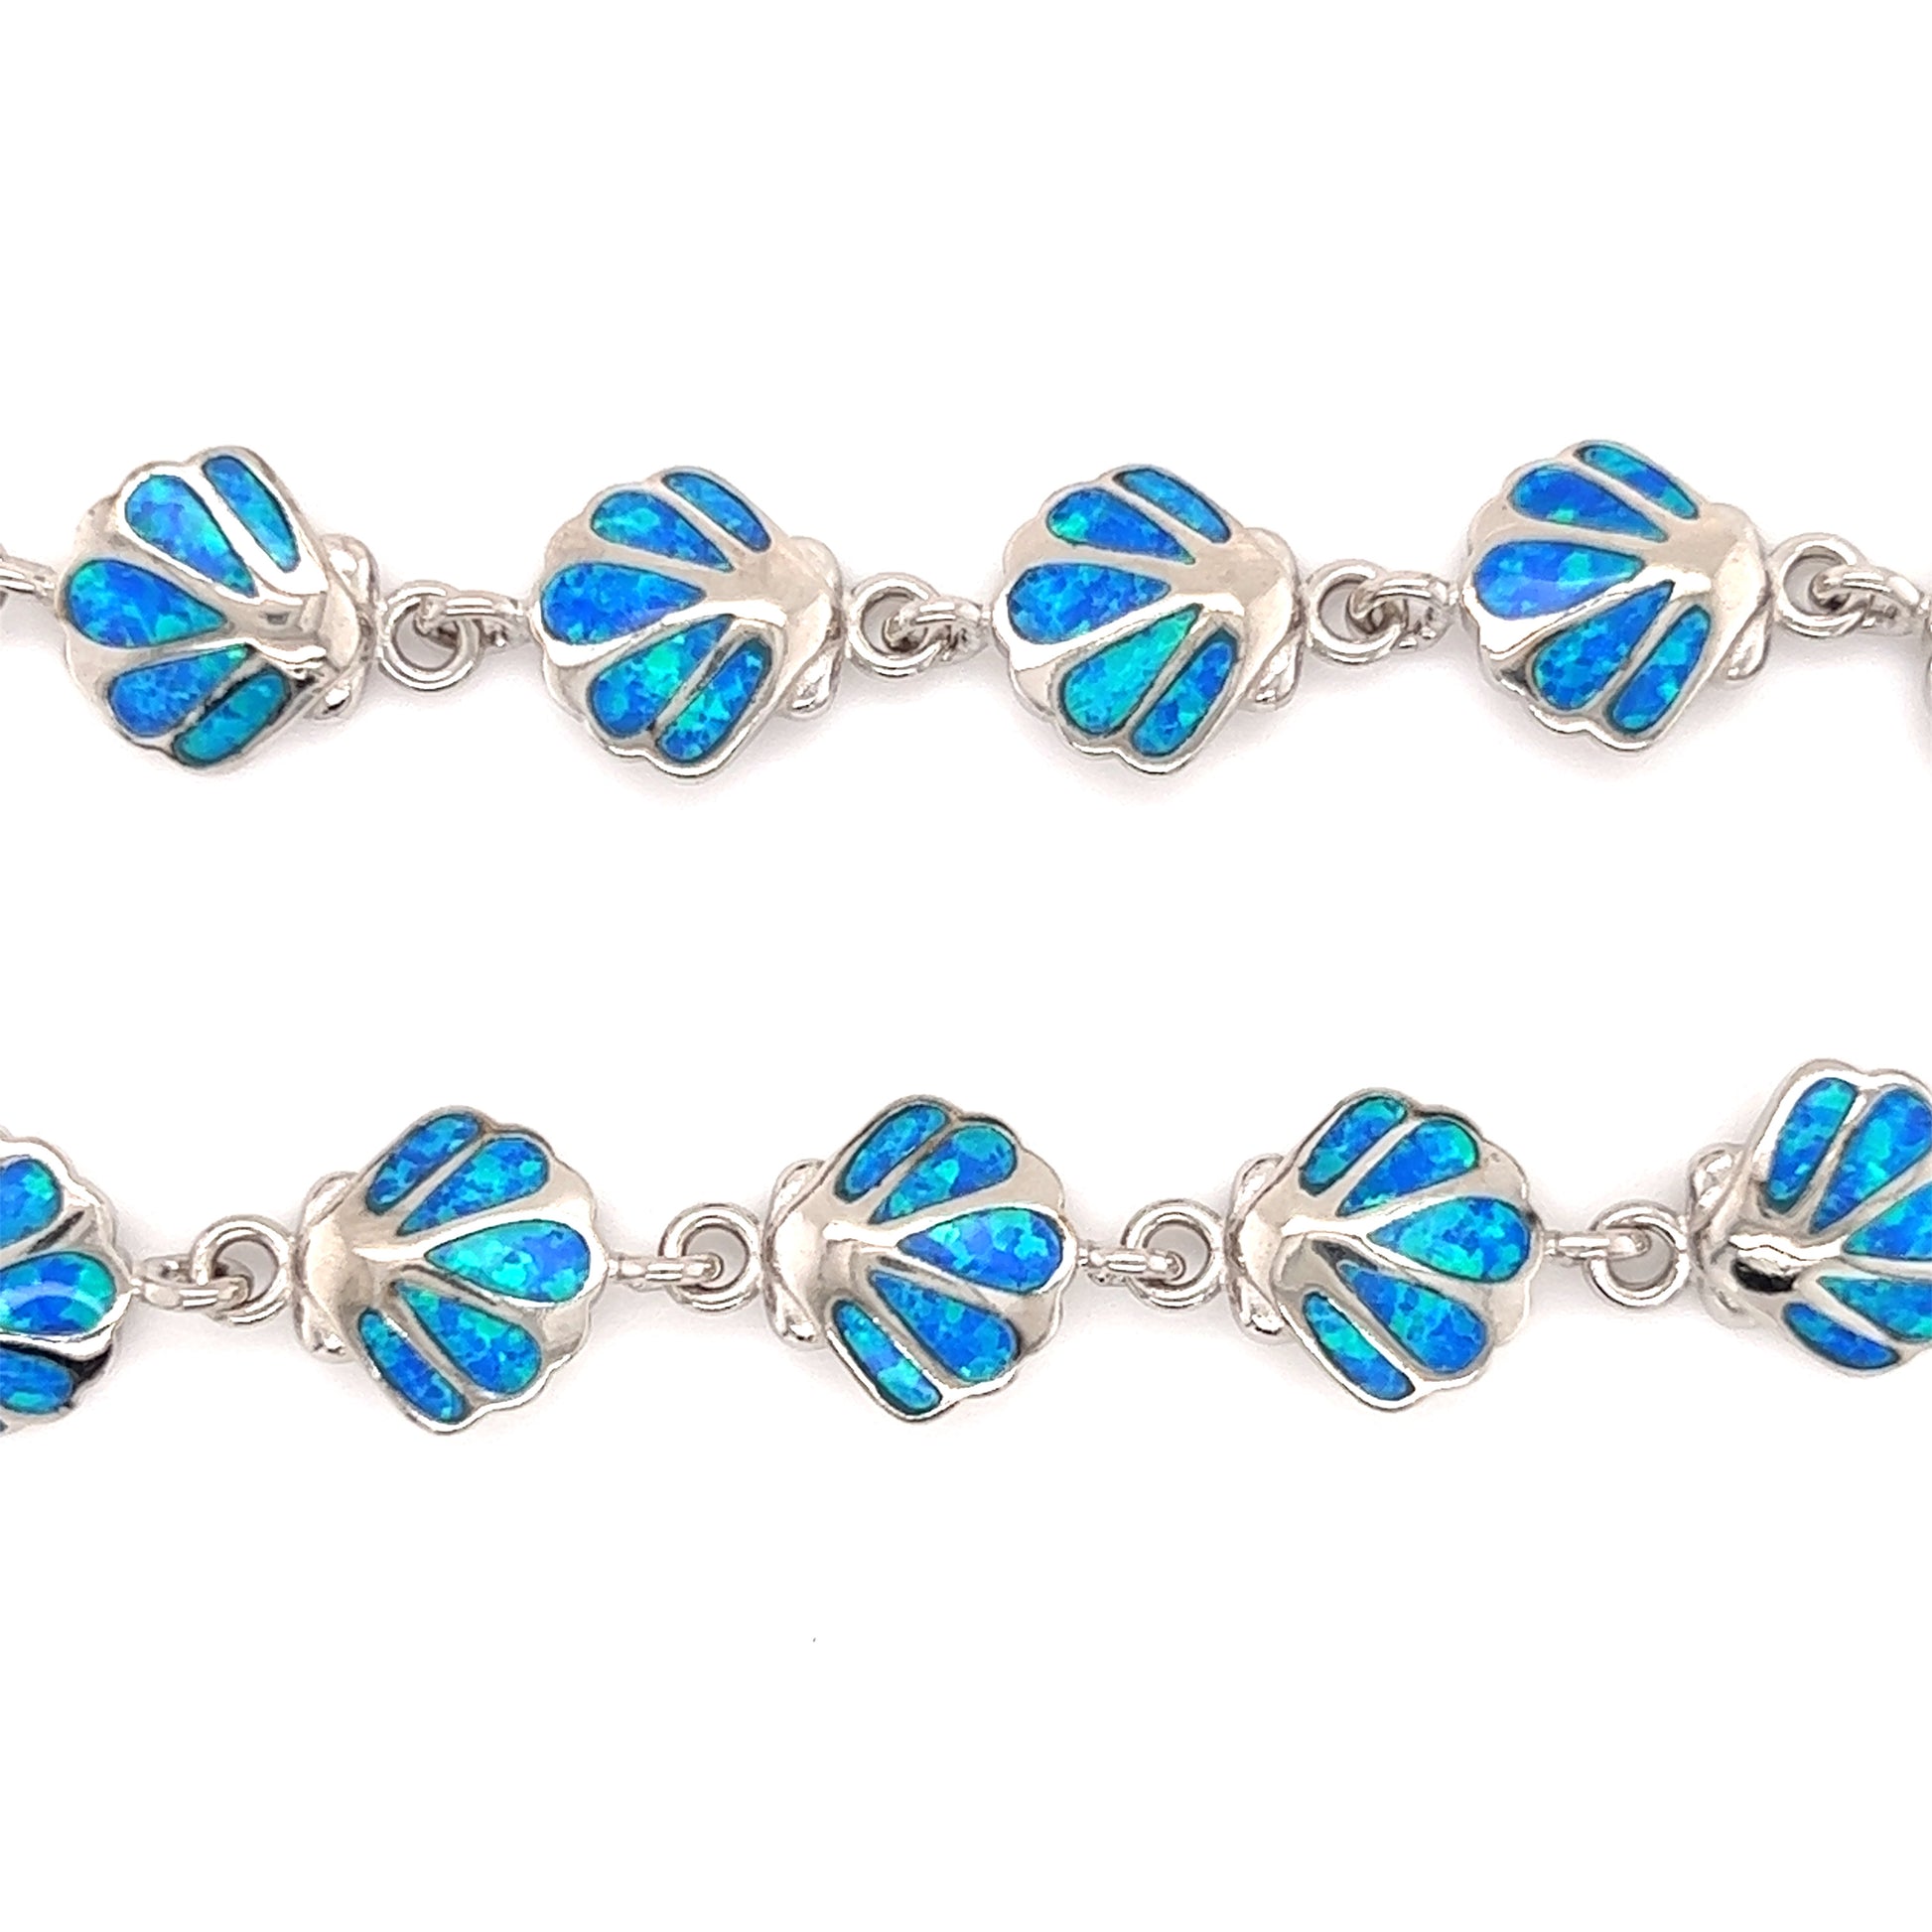 Seashell Bracelet with Blue Opal inlay in Sterling Silver Links View